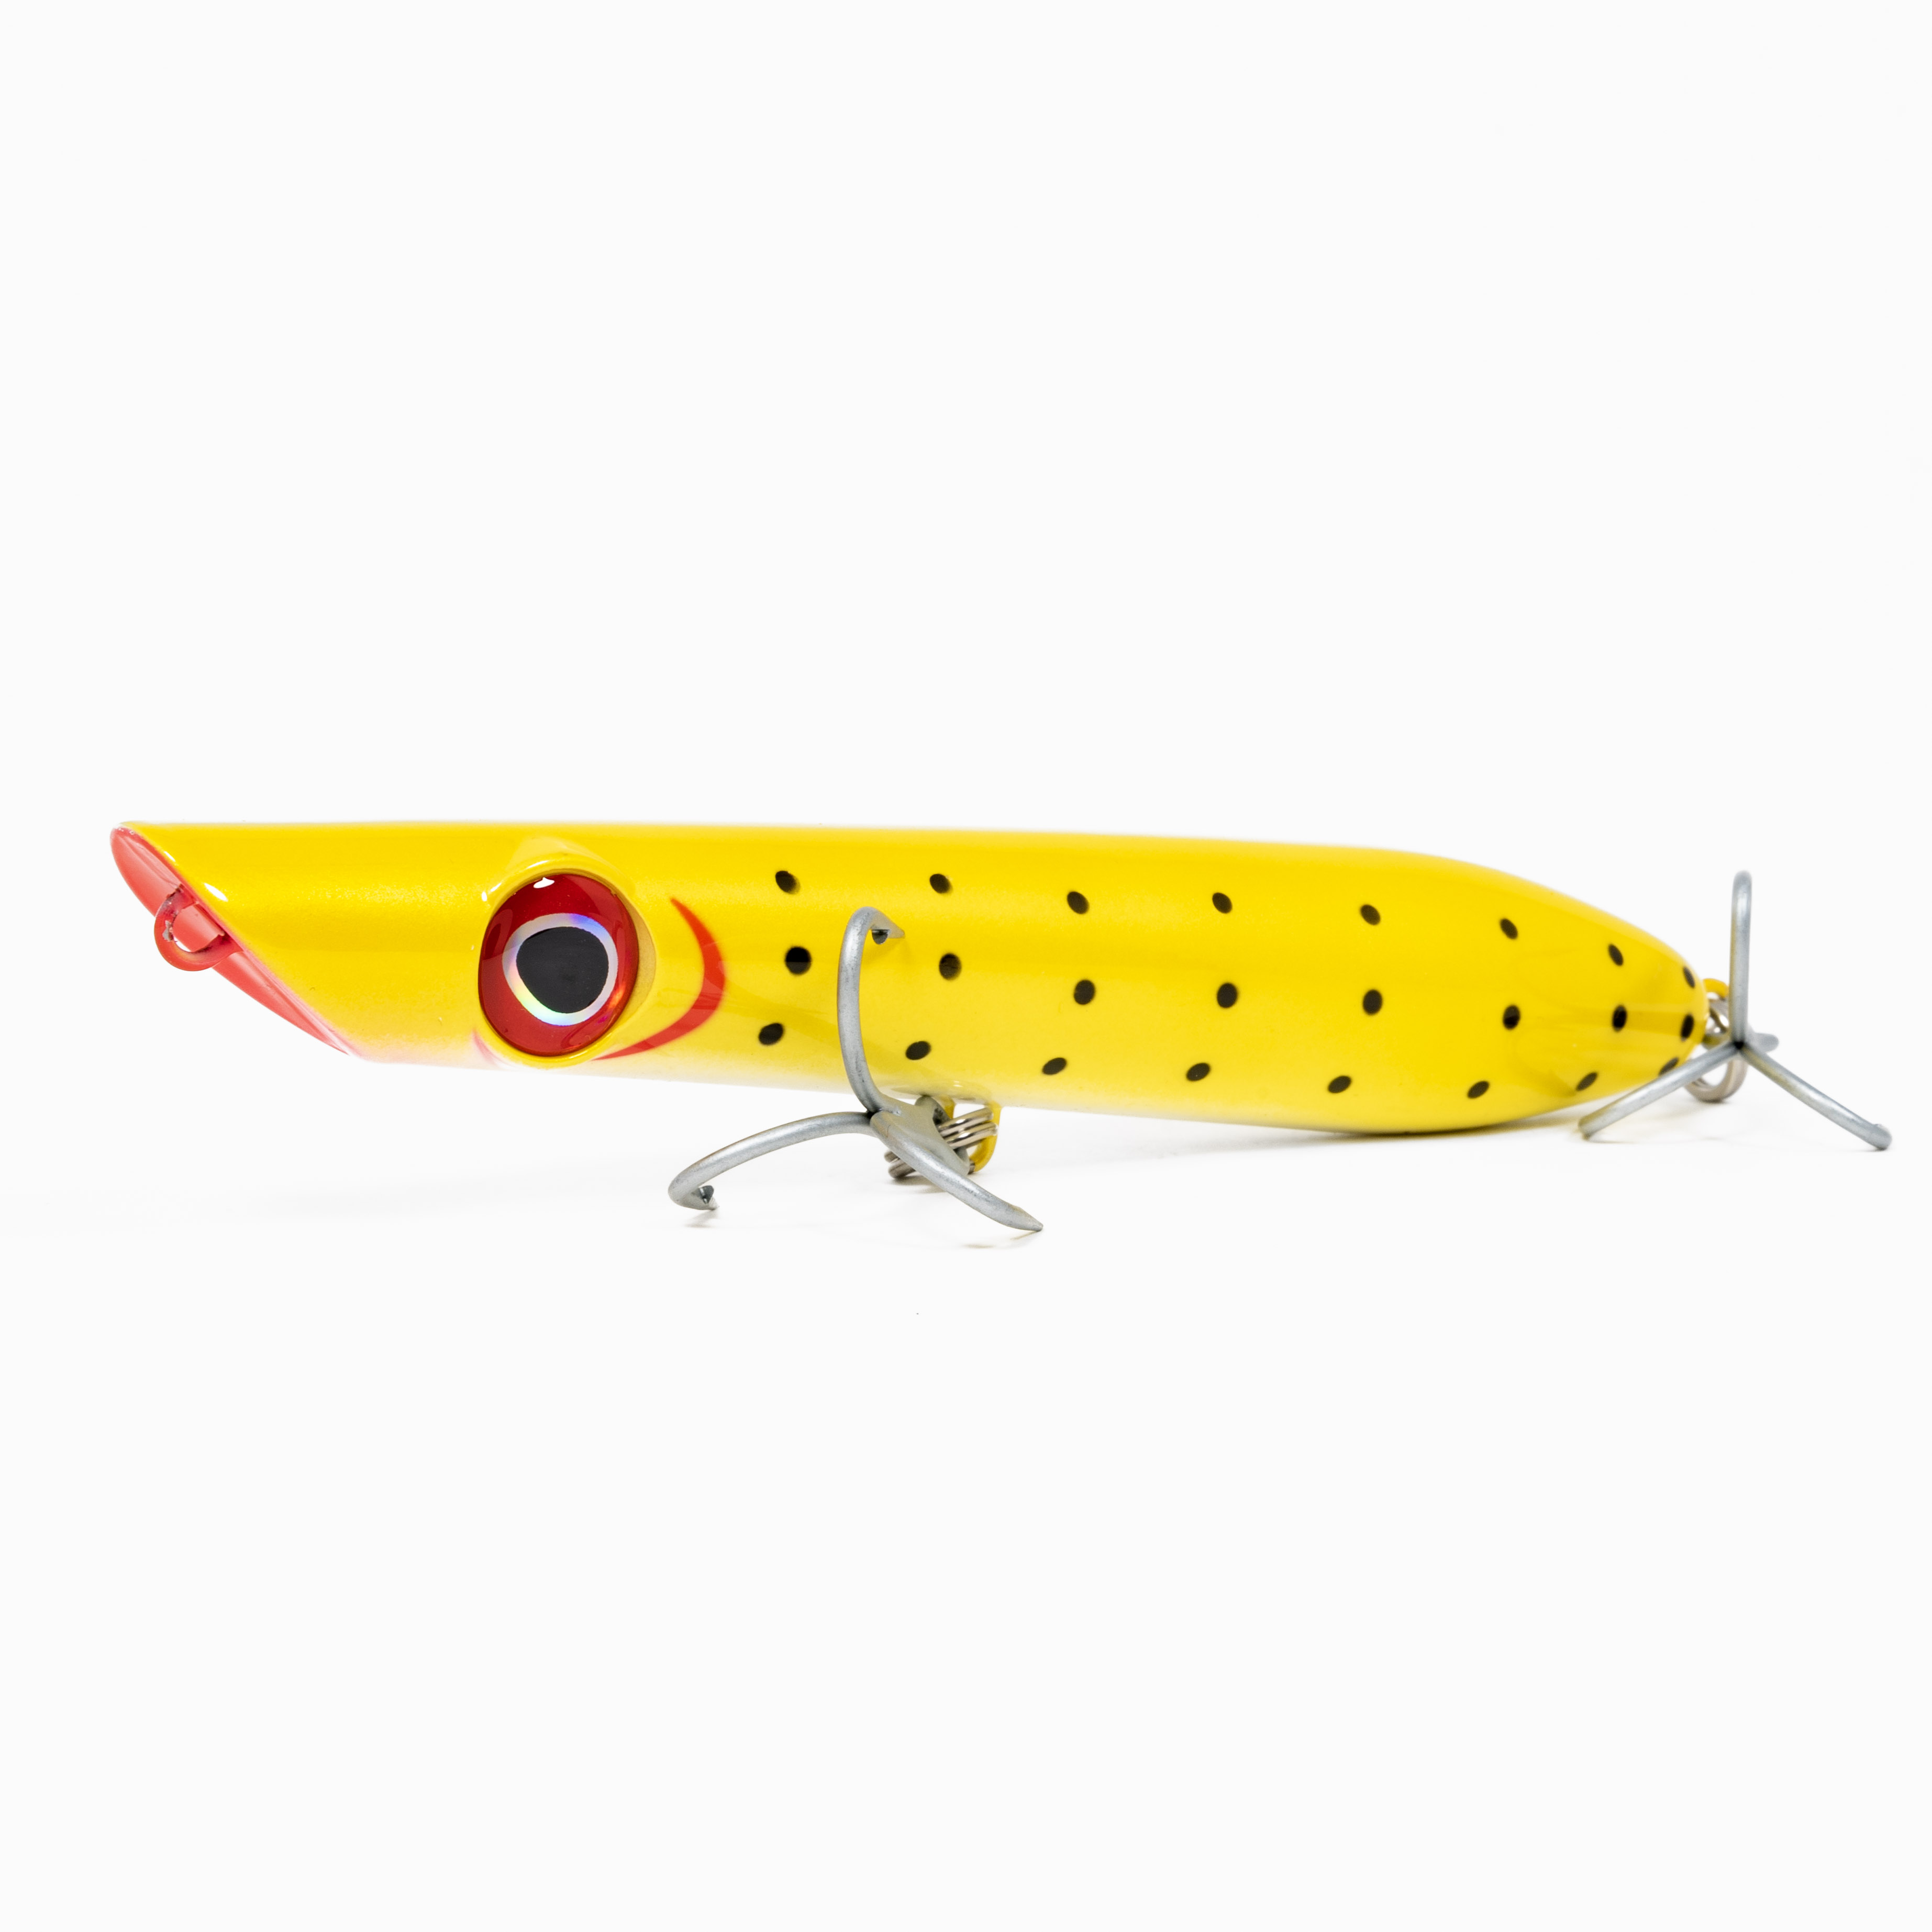 Baits & Lures for Fishing